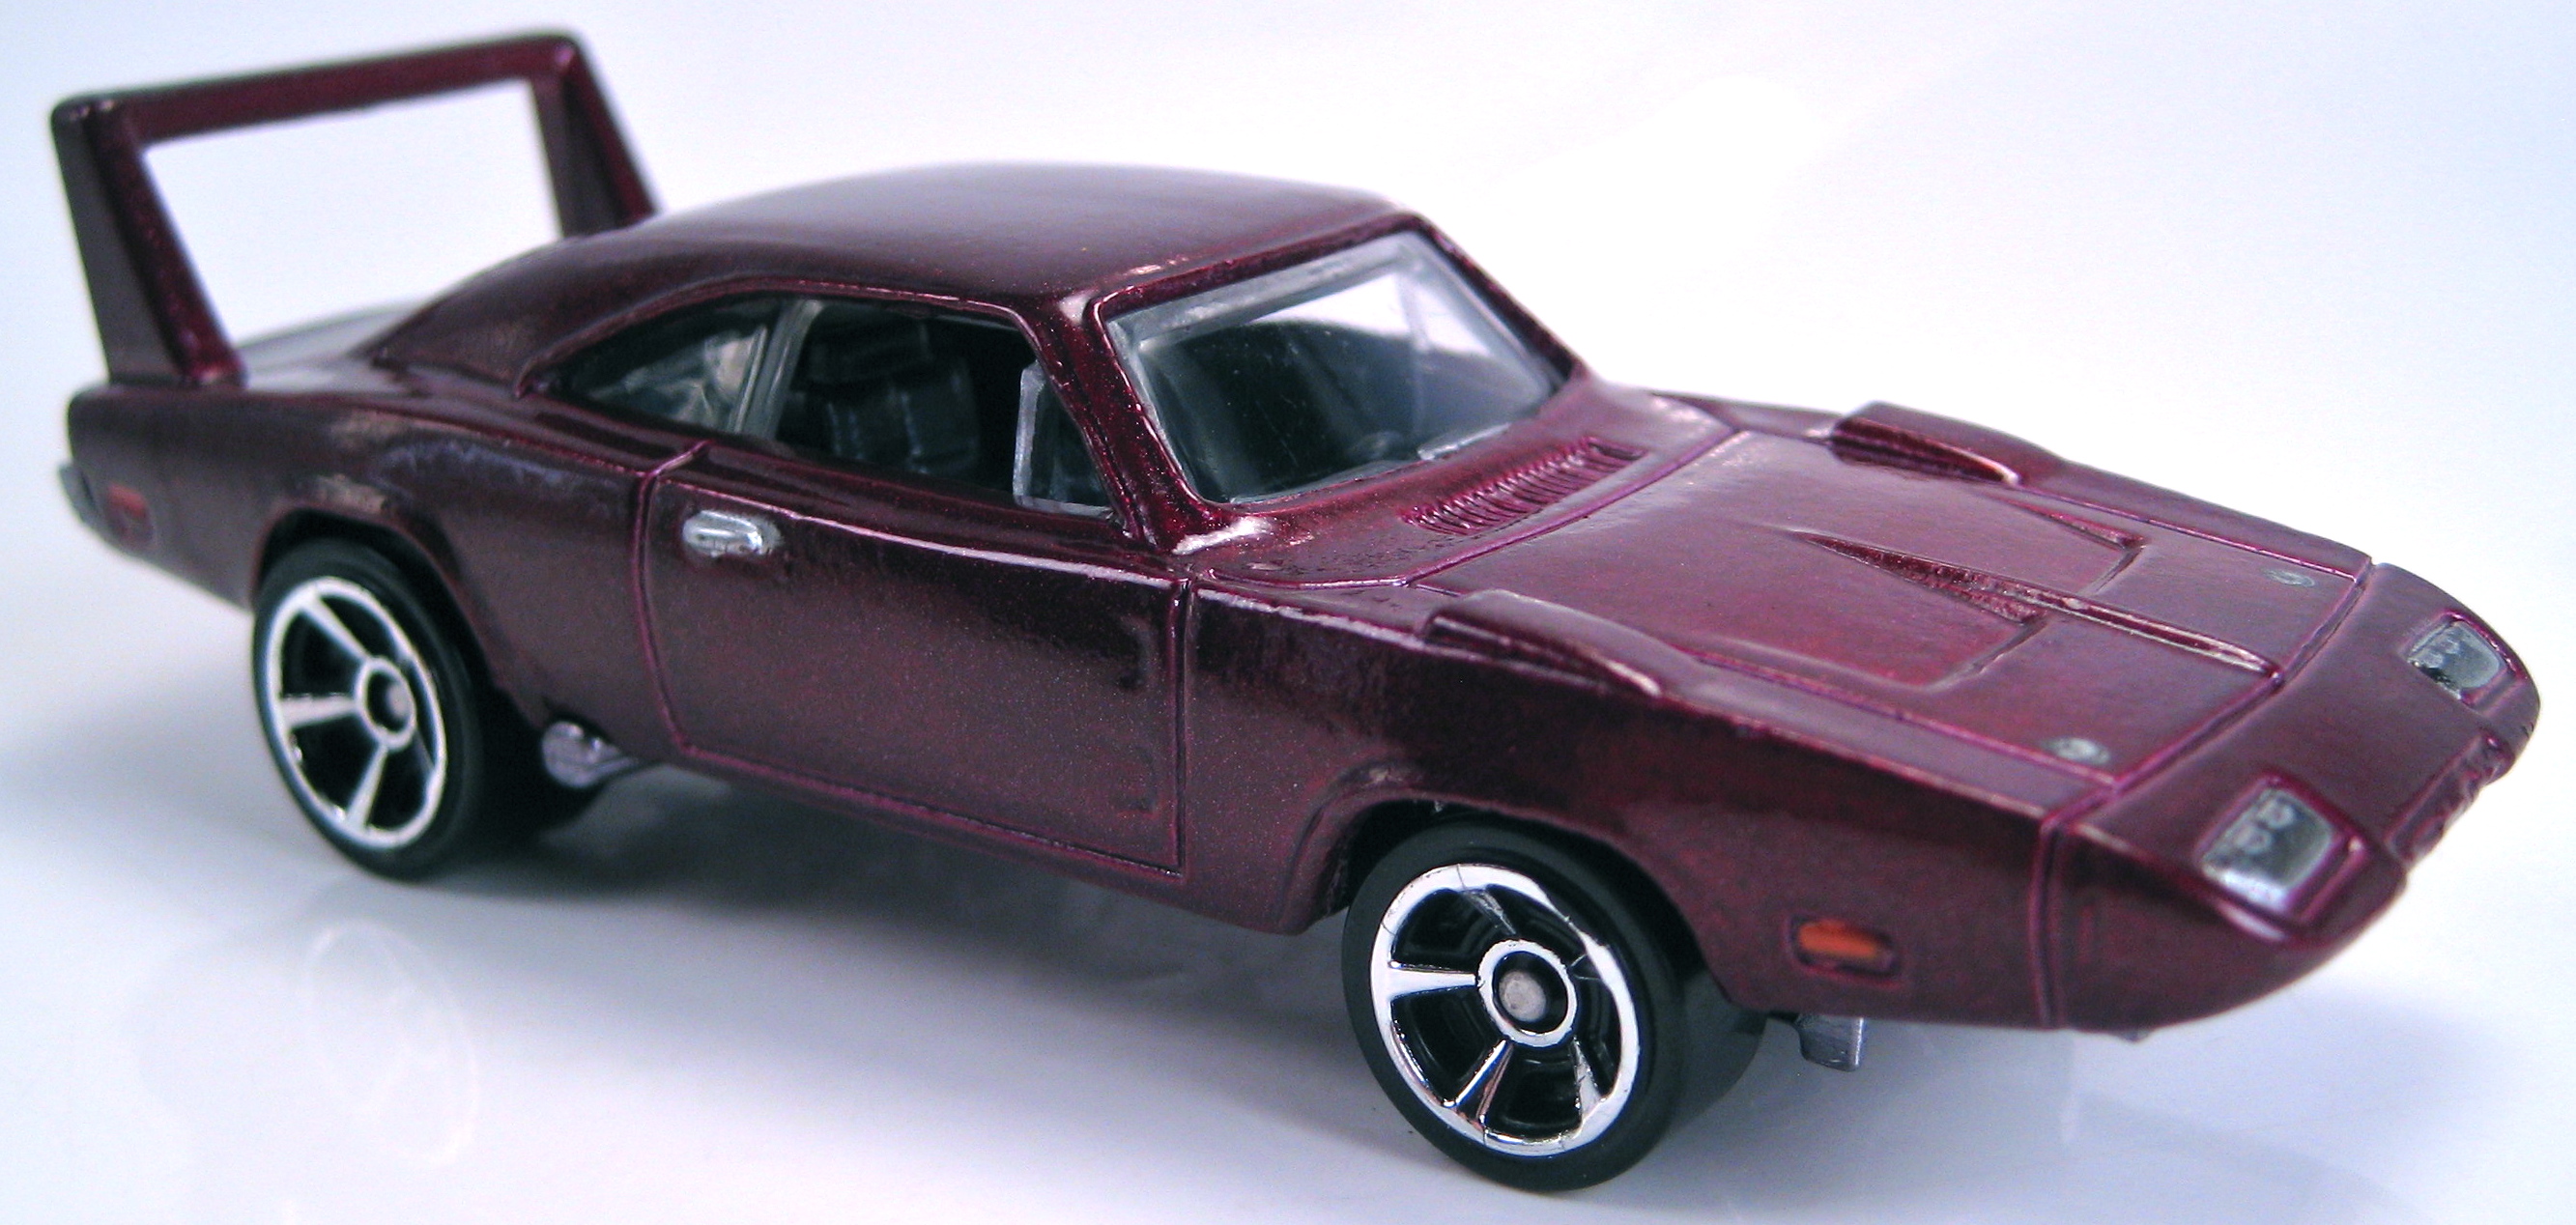 hot wheels 1969 dodge charger